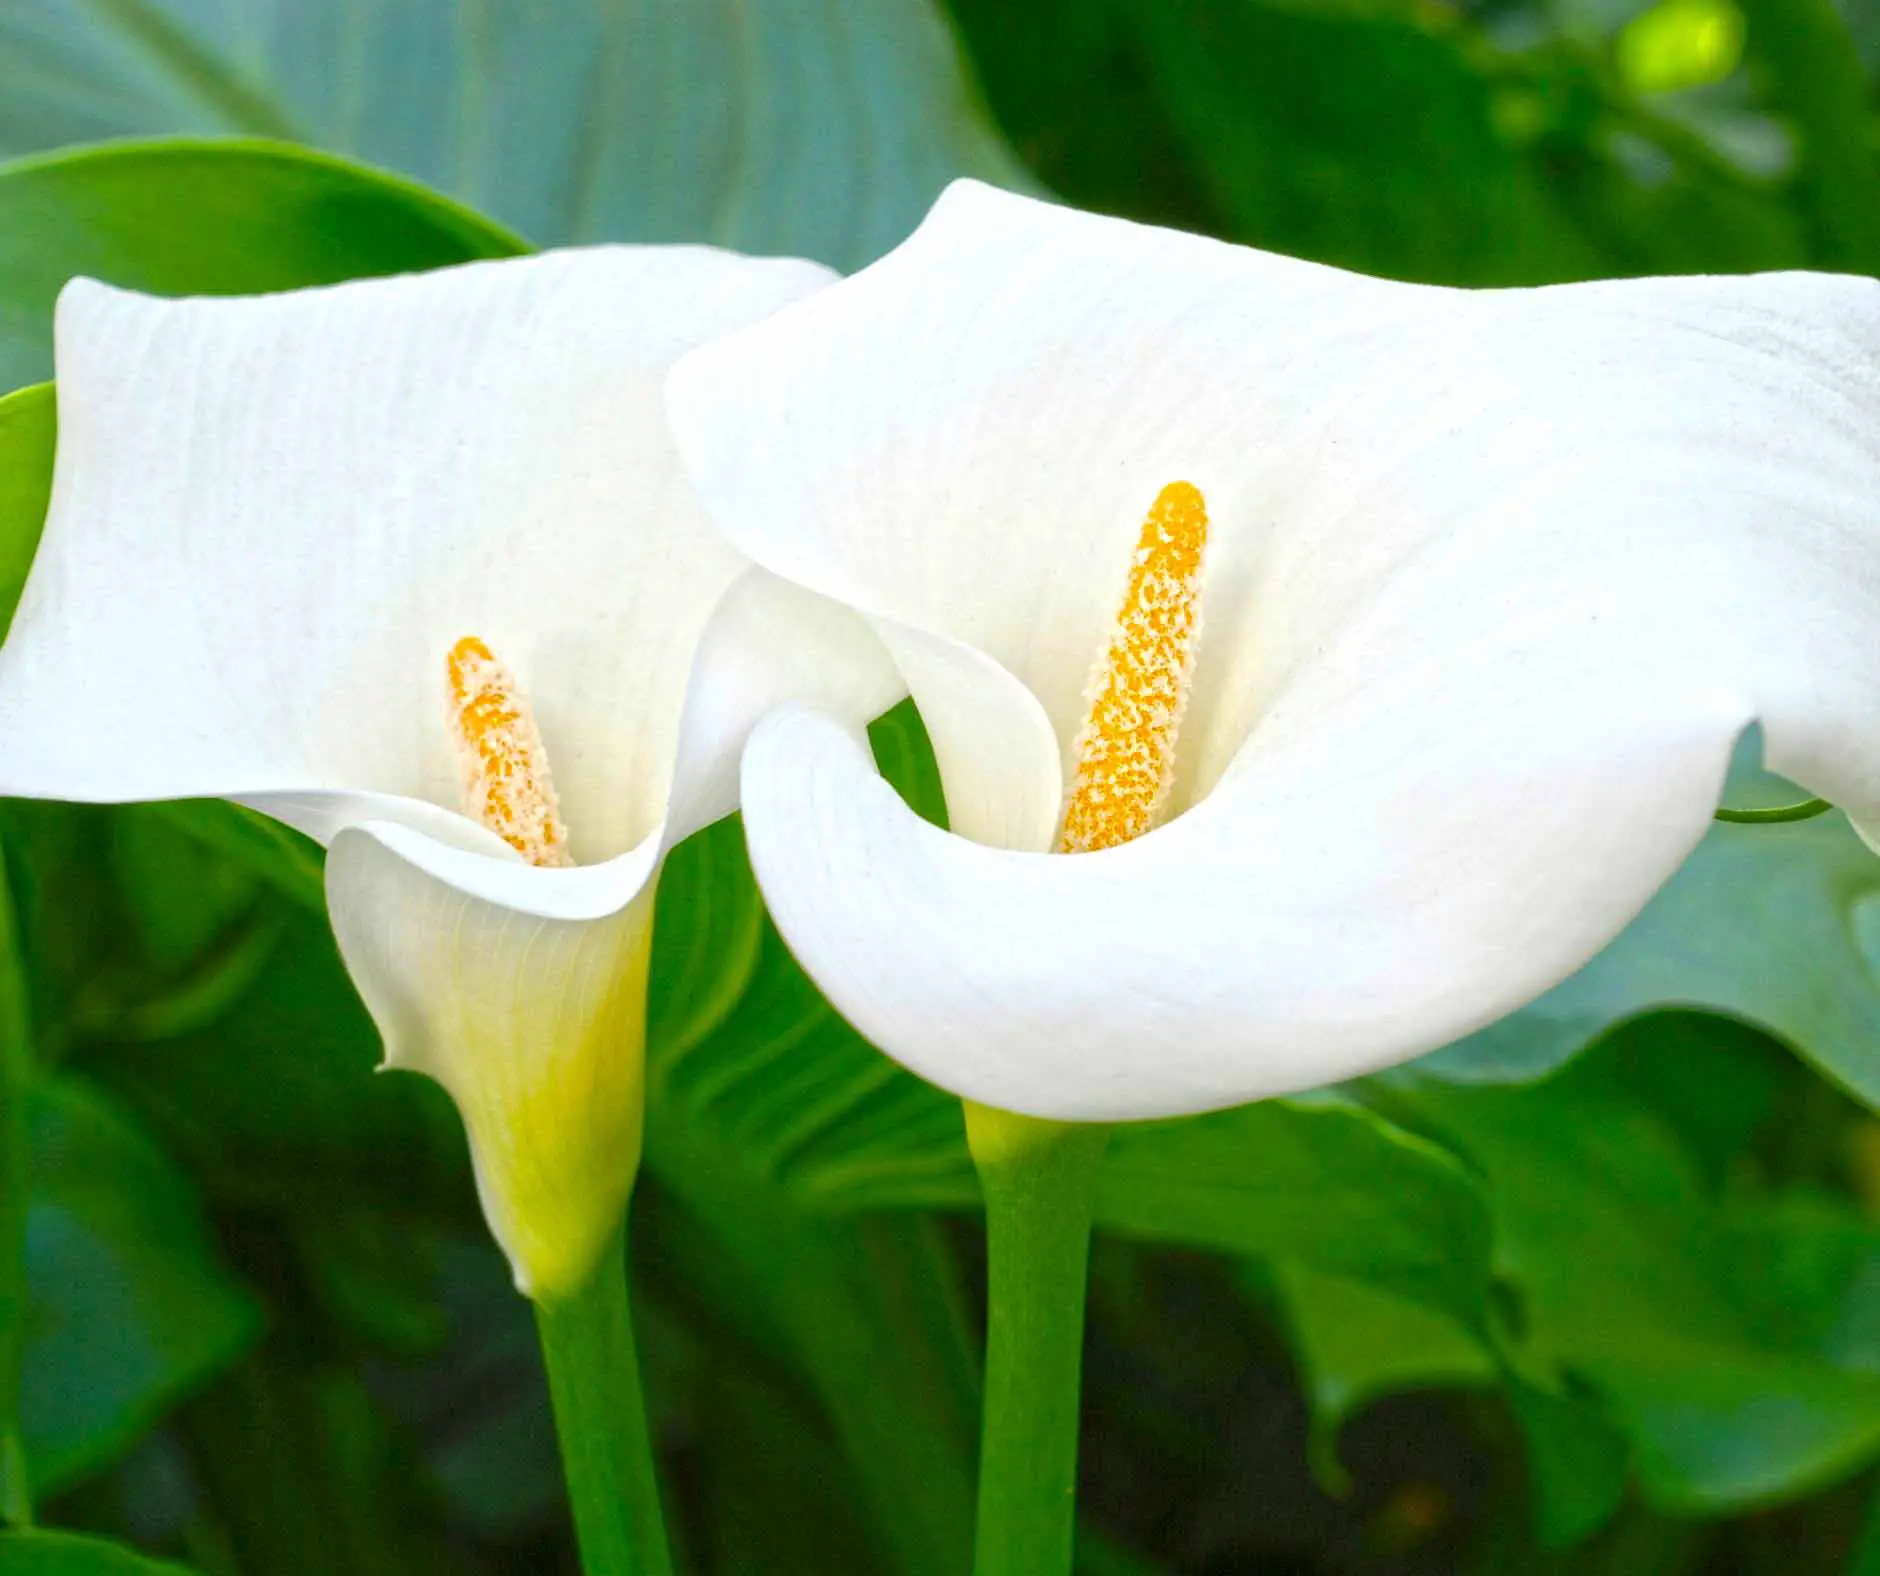 two calla lily flowers